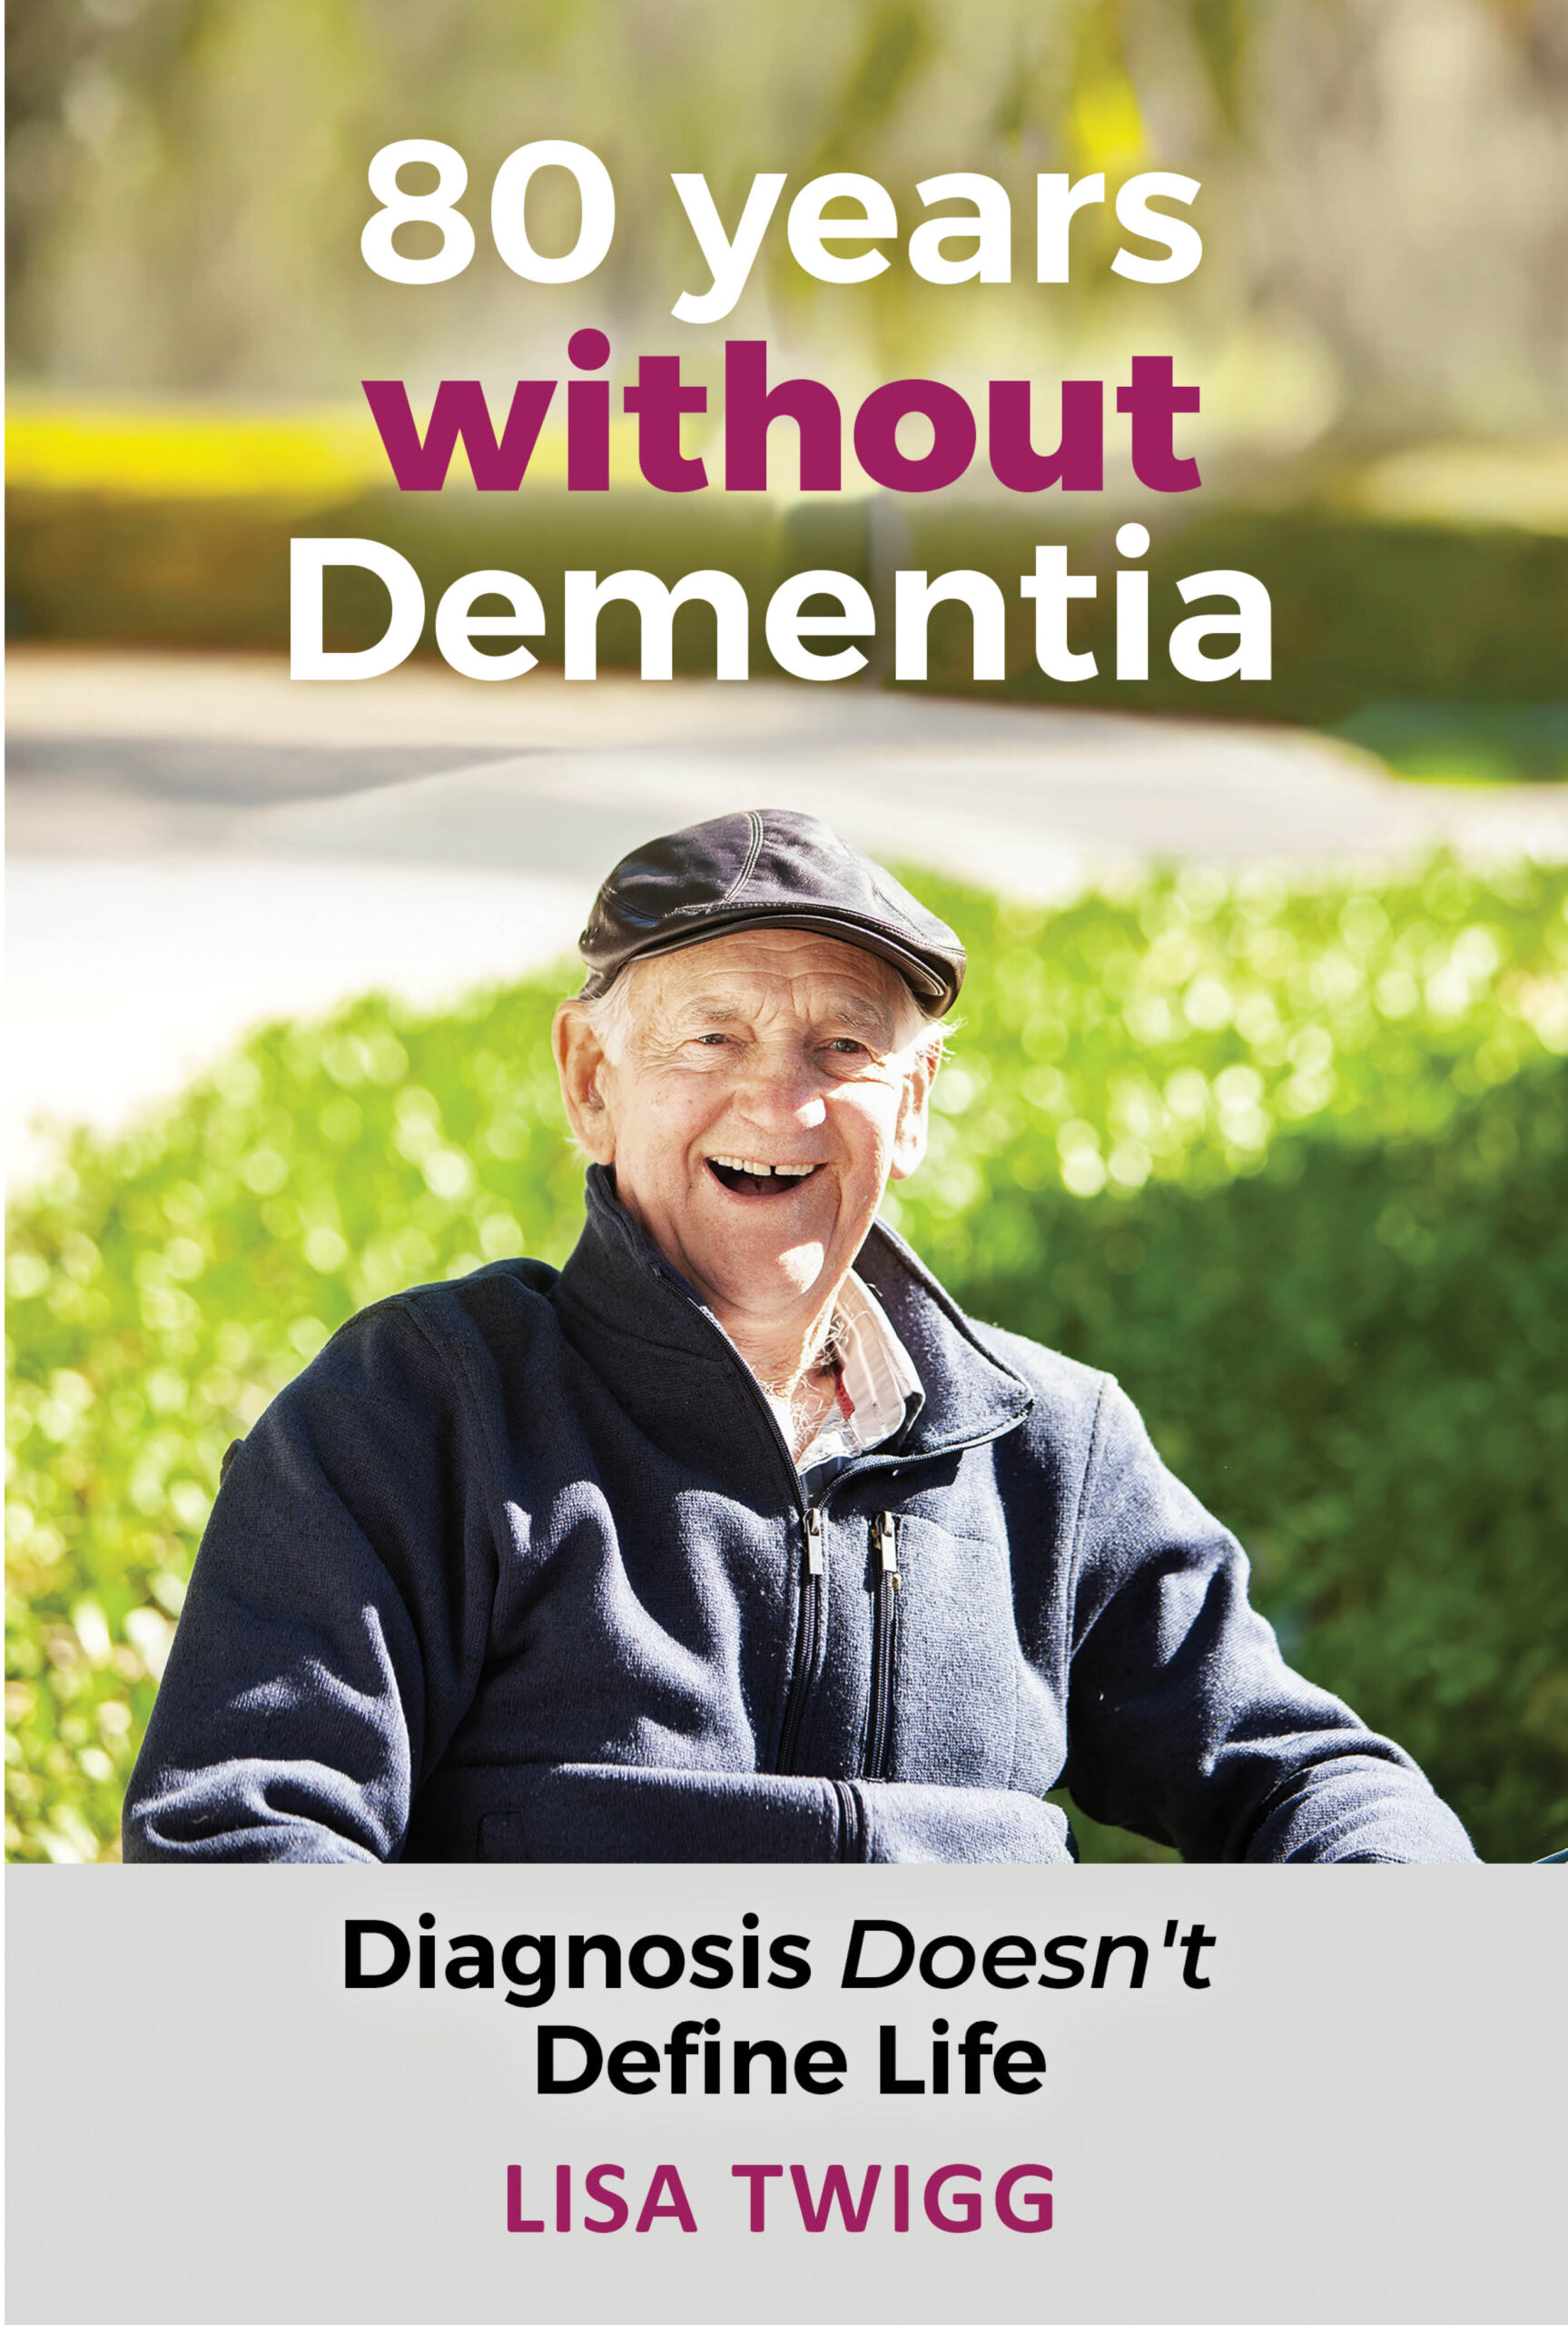 80 YEARS WITHOUT DEMENTIA